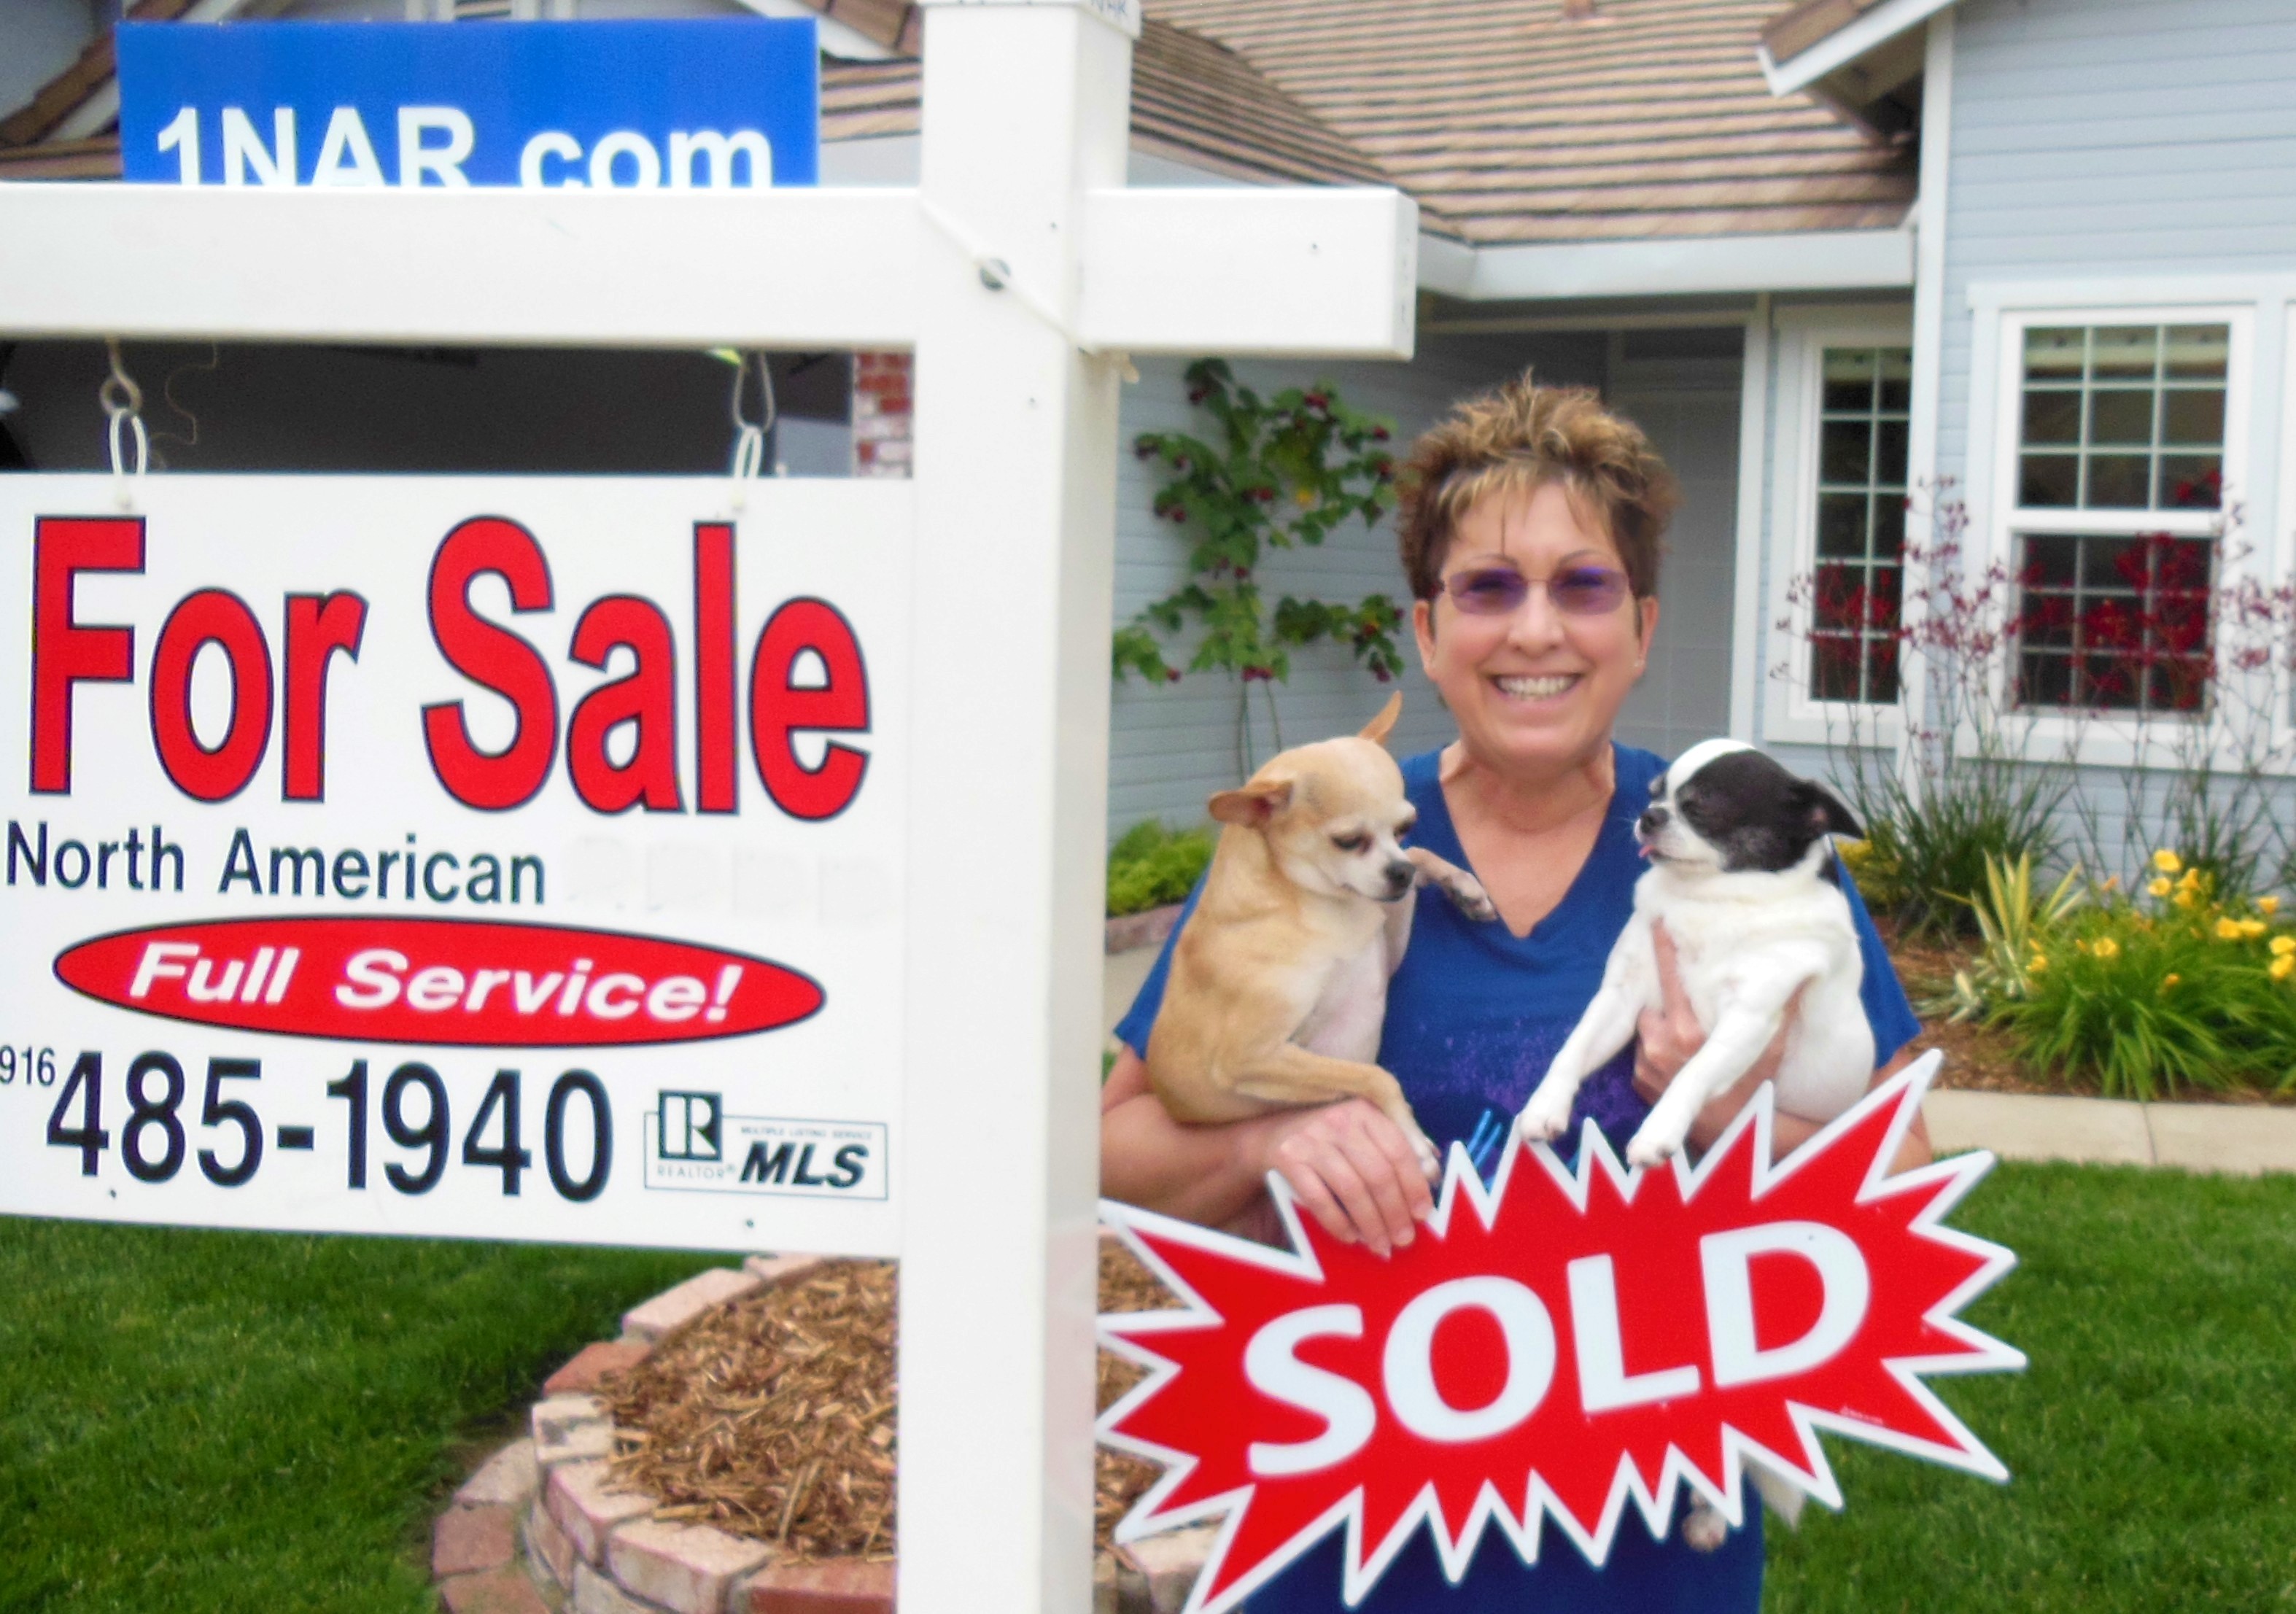 Seller standing outside her home next to our real estate for sale sign happy because the home is SOLD